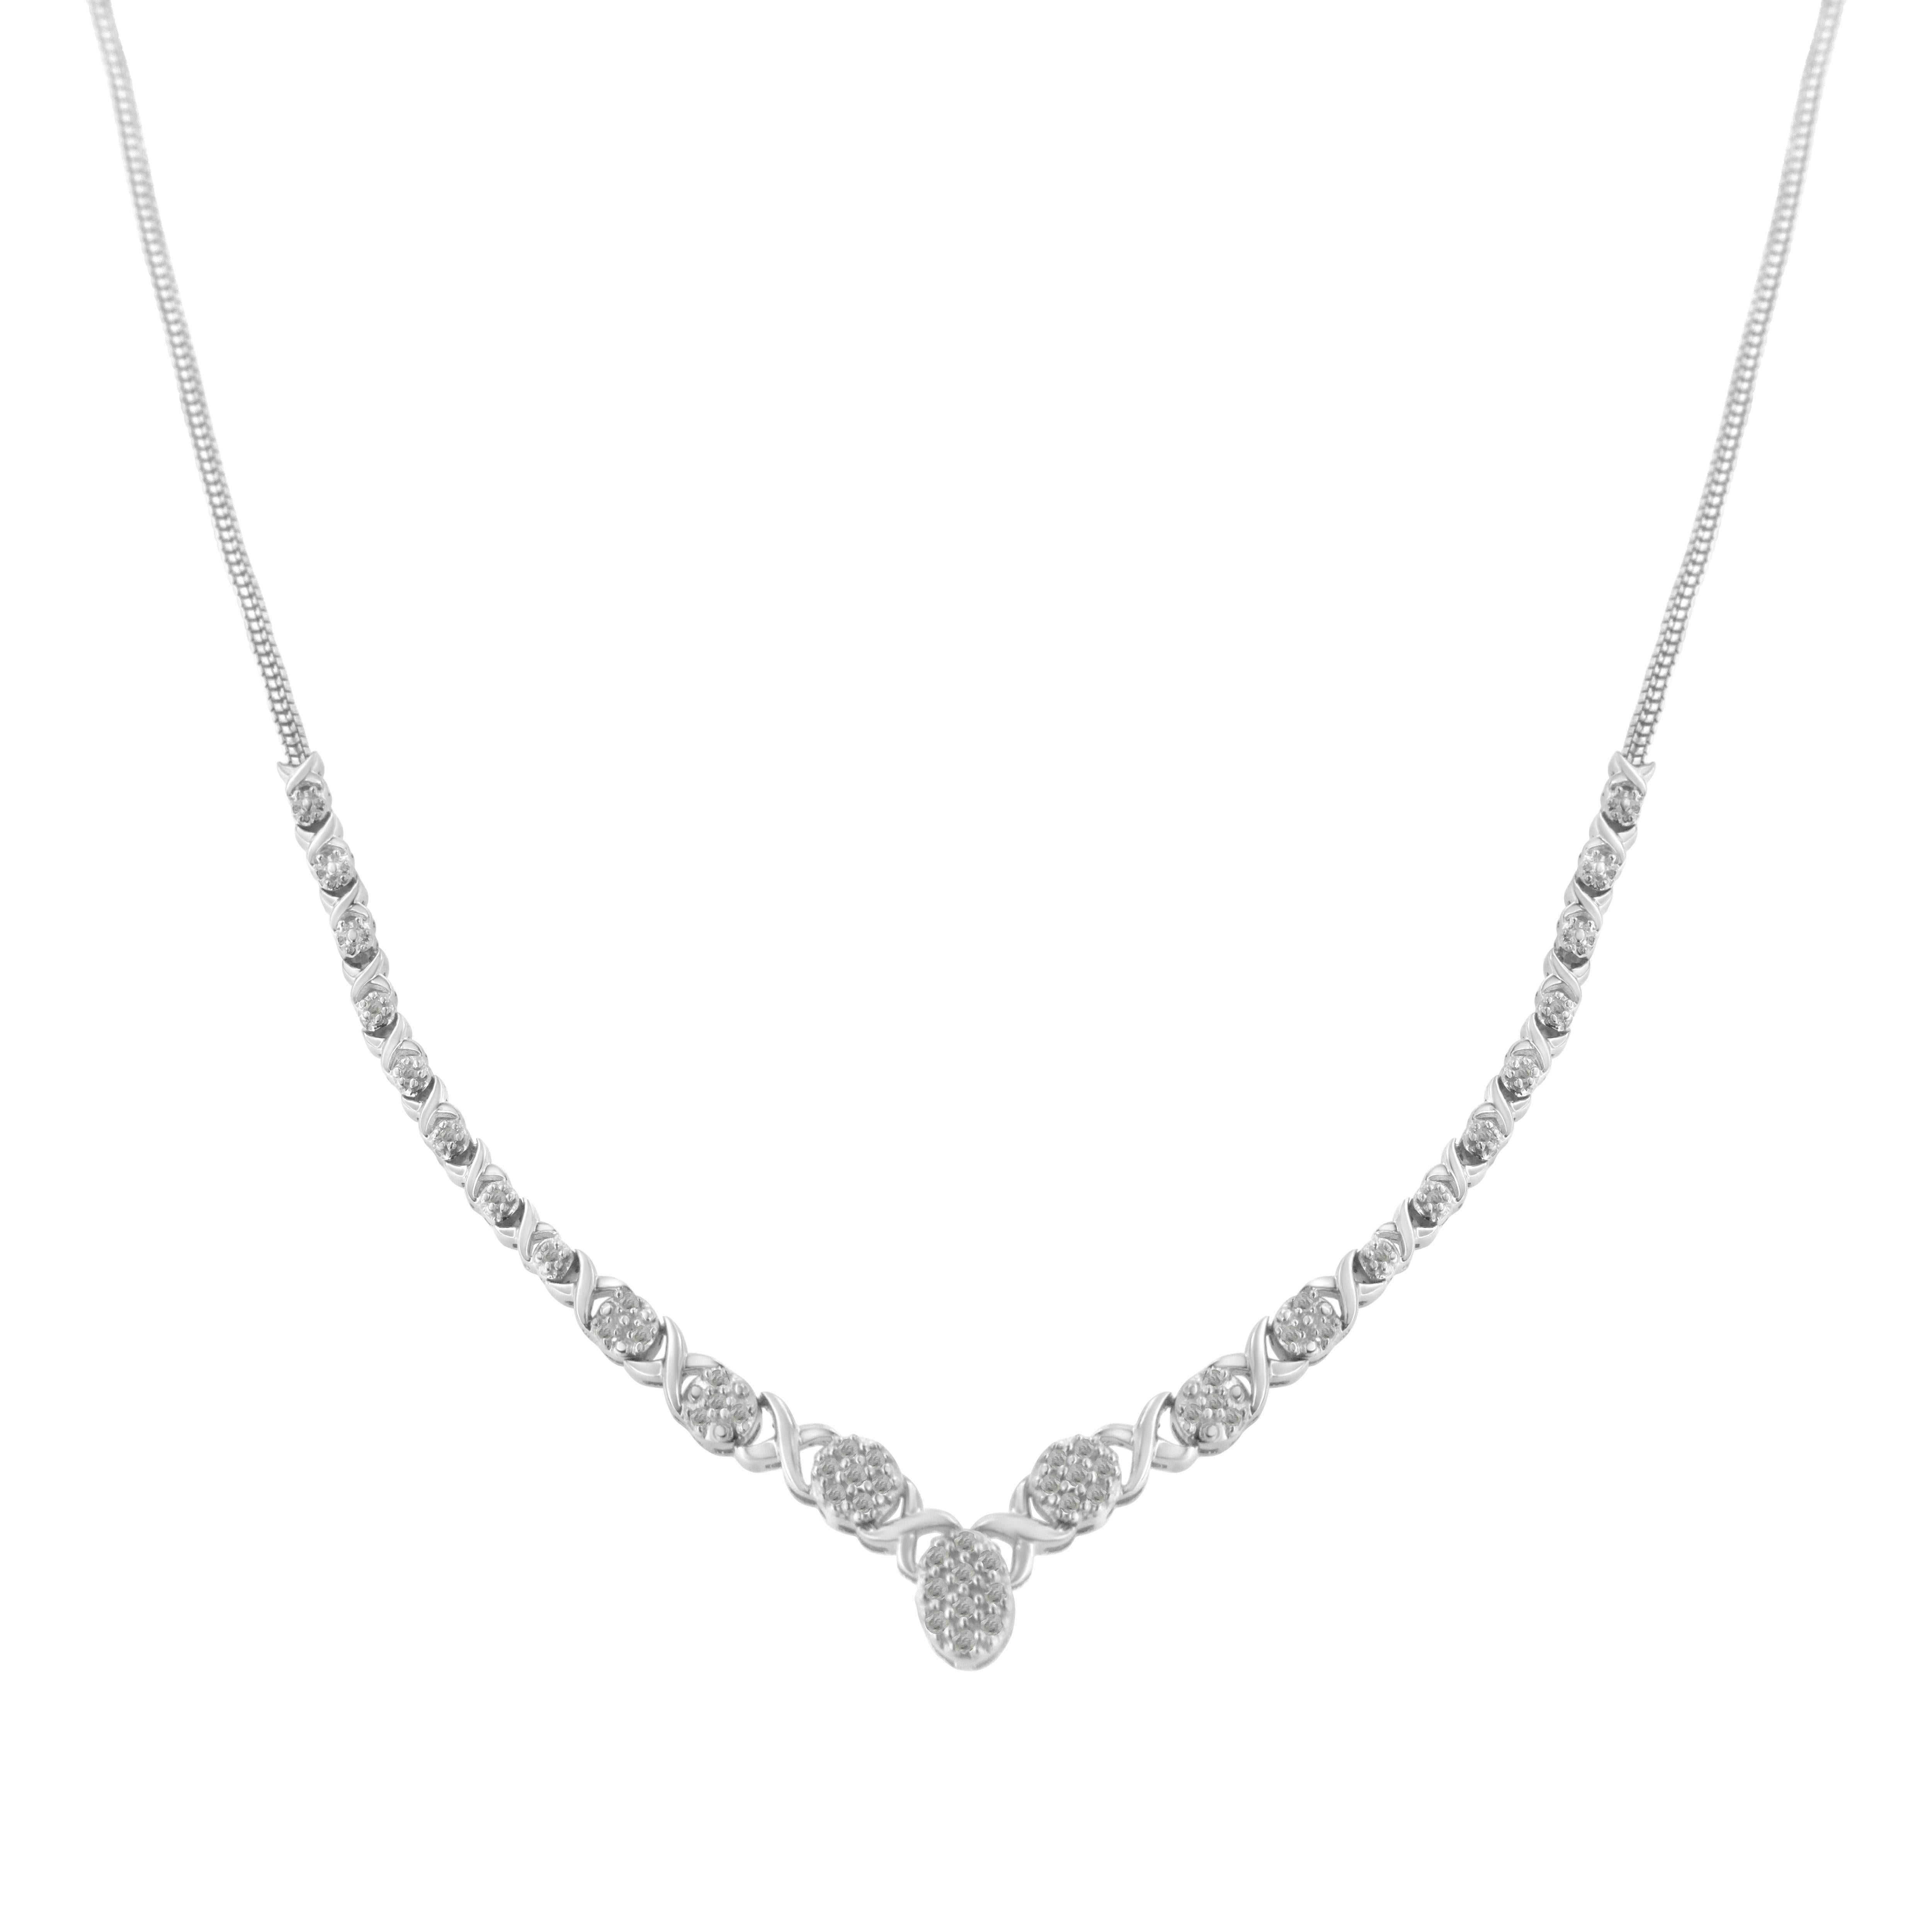 An elegant and breathtaking cluster diamond necklace. Each diamond is perfectly placed to create a beautiful V-shaped piece that is crafted in the finest .25 sterling silver. There are 48 natural diamonds, each set in a prong setting. The diamonds